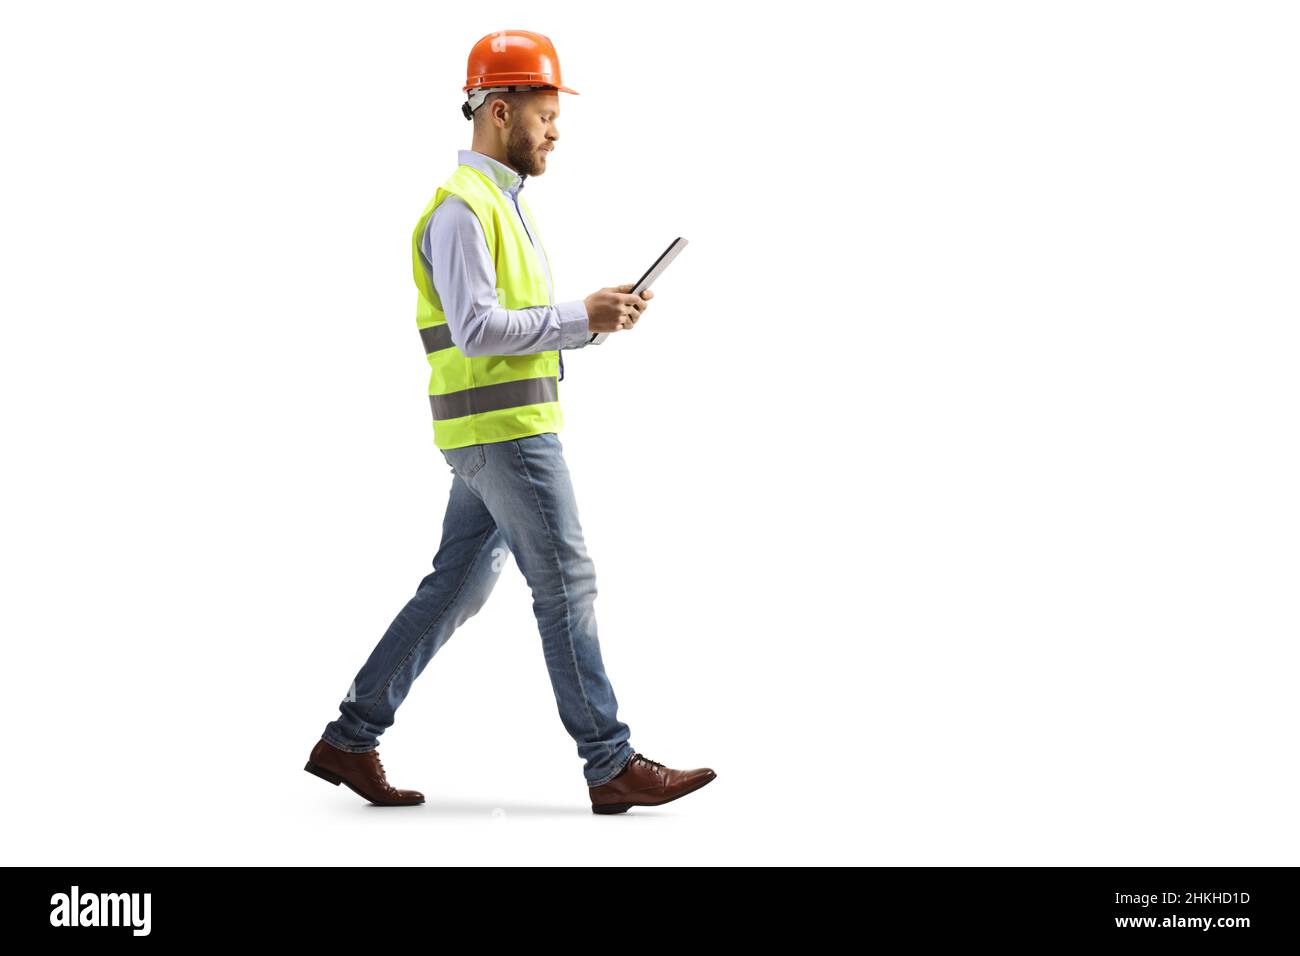 Engineer with a hardhat walking and reading a document isolated on white background Stock Photo